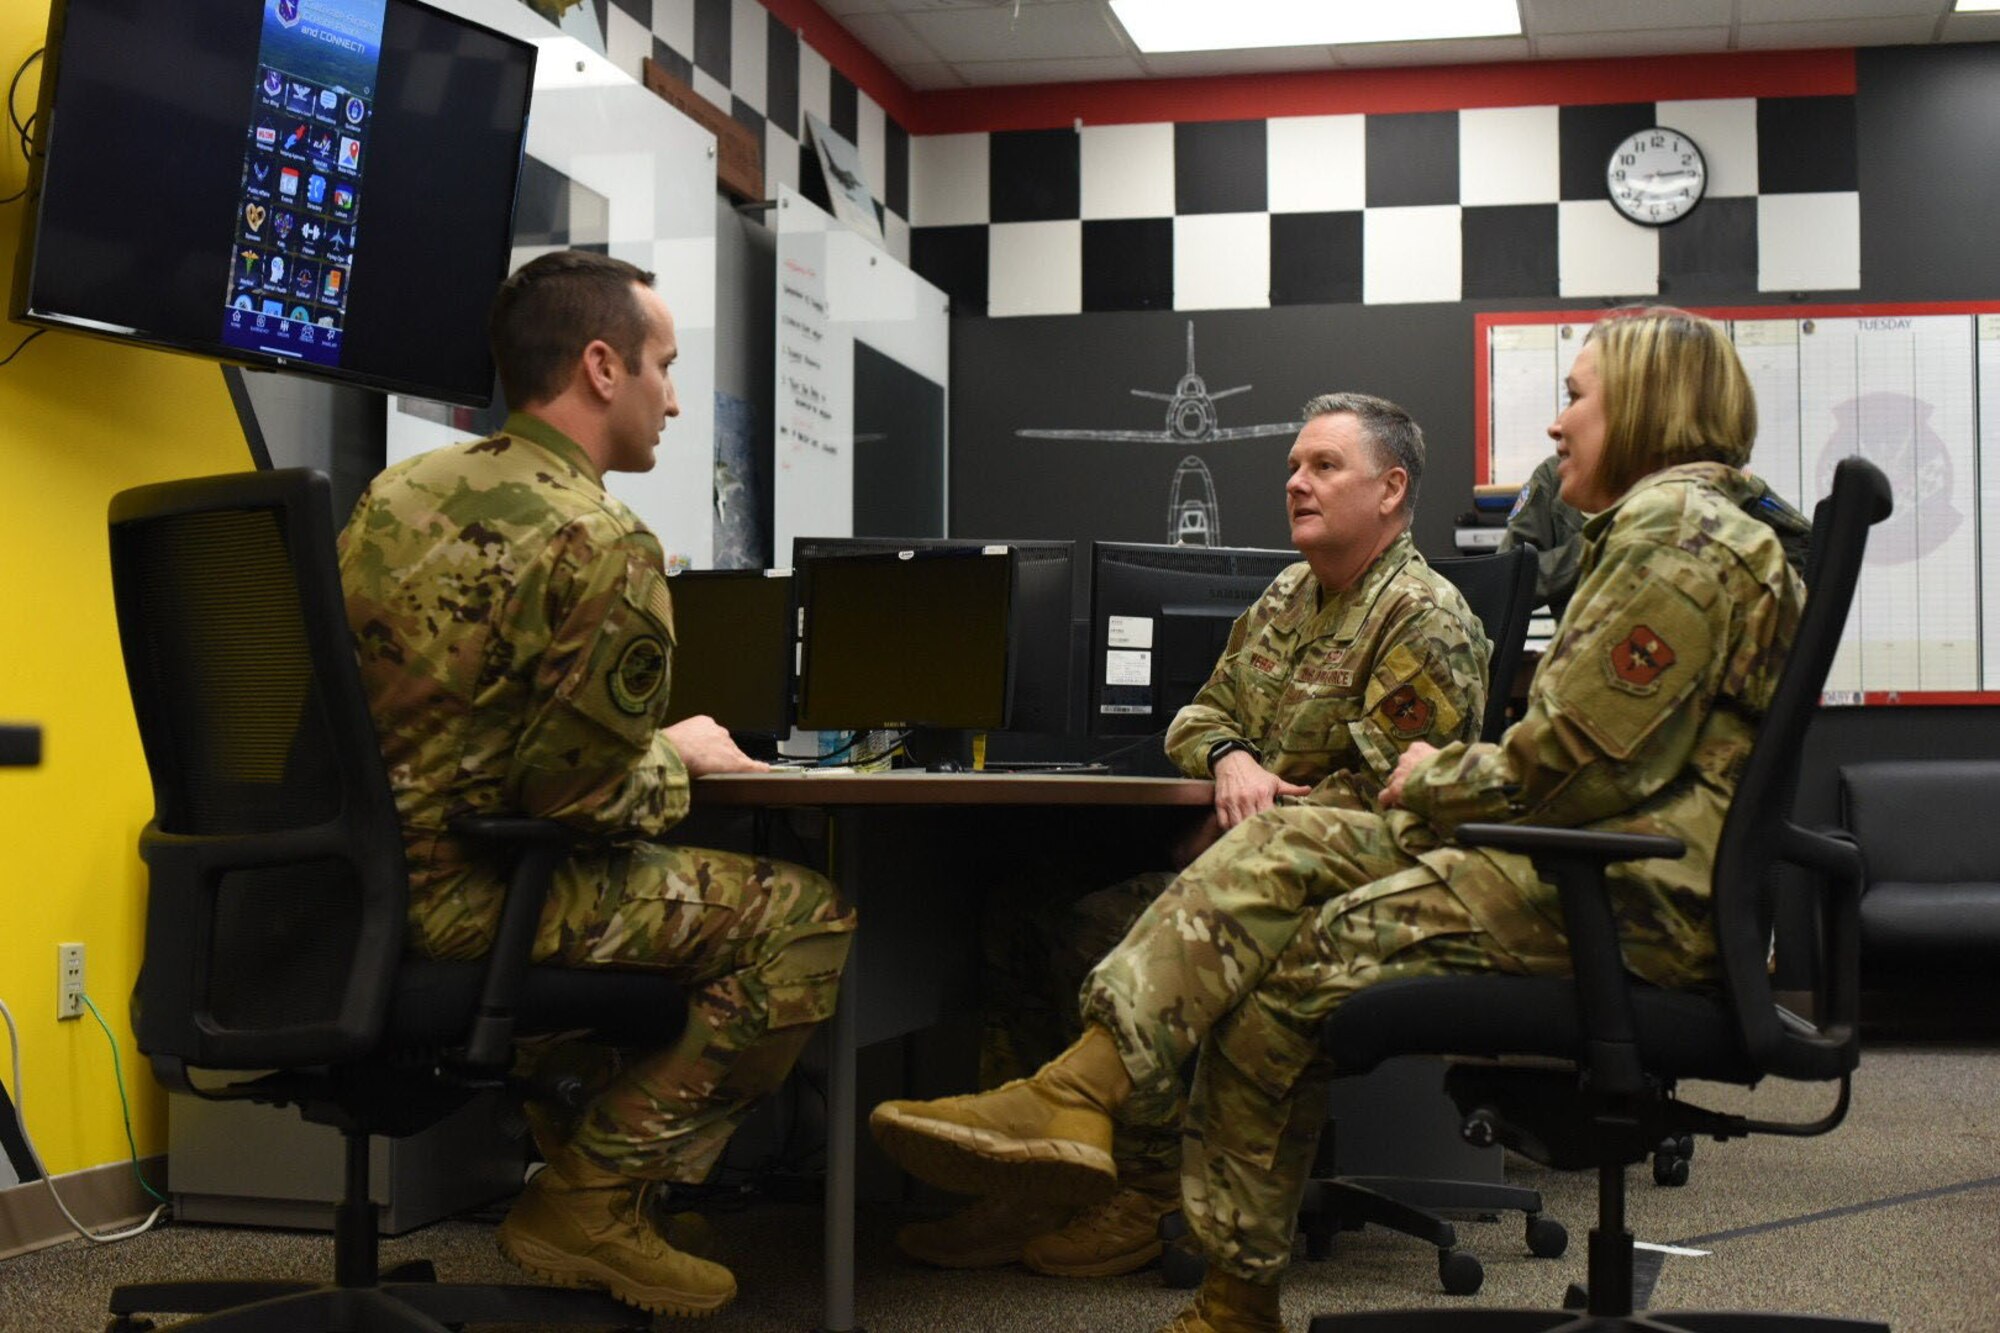 U.S. Air Force Lt. Gen. Brad Webb, commander of Air Education and Training Command, and Chief Master Sgt. Juliet Gudgel, command chief of AETC, are briefed by Maj. Tory Lodmell, 14th Flying Training Wing Commander’s Action Group director, about the Columbus Air Force Base mobile app Feb. 5, 2020, on Columbus AFB, Mississippi. The app was designed for members of team BLAZE to have pertinent information about the base including a directory, map, activities and pop up notifications. (U.S. Air Force photo by Senior Airman Keith Holcomb)